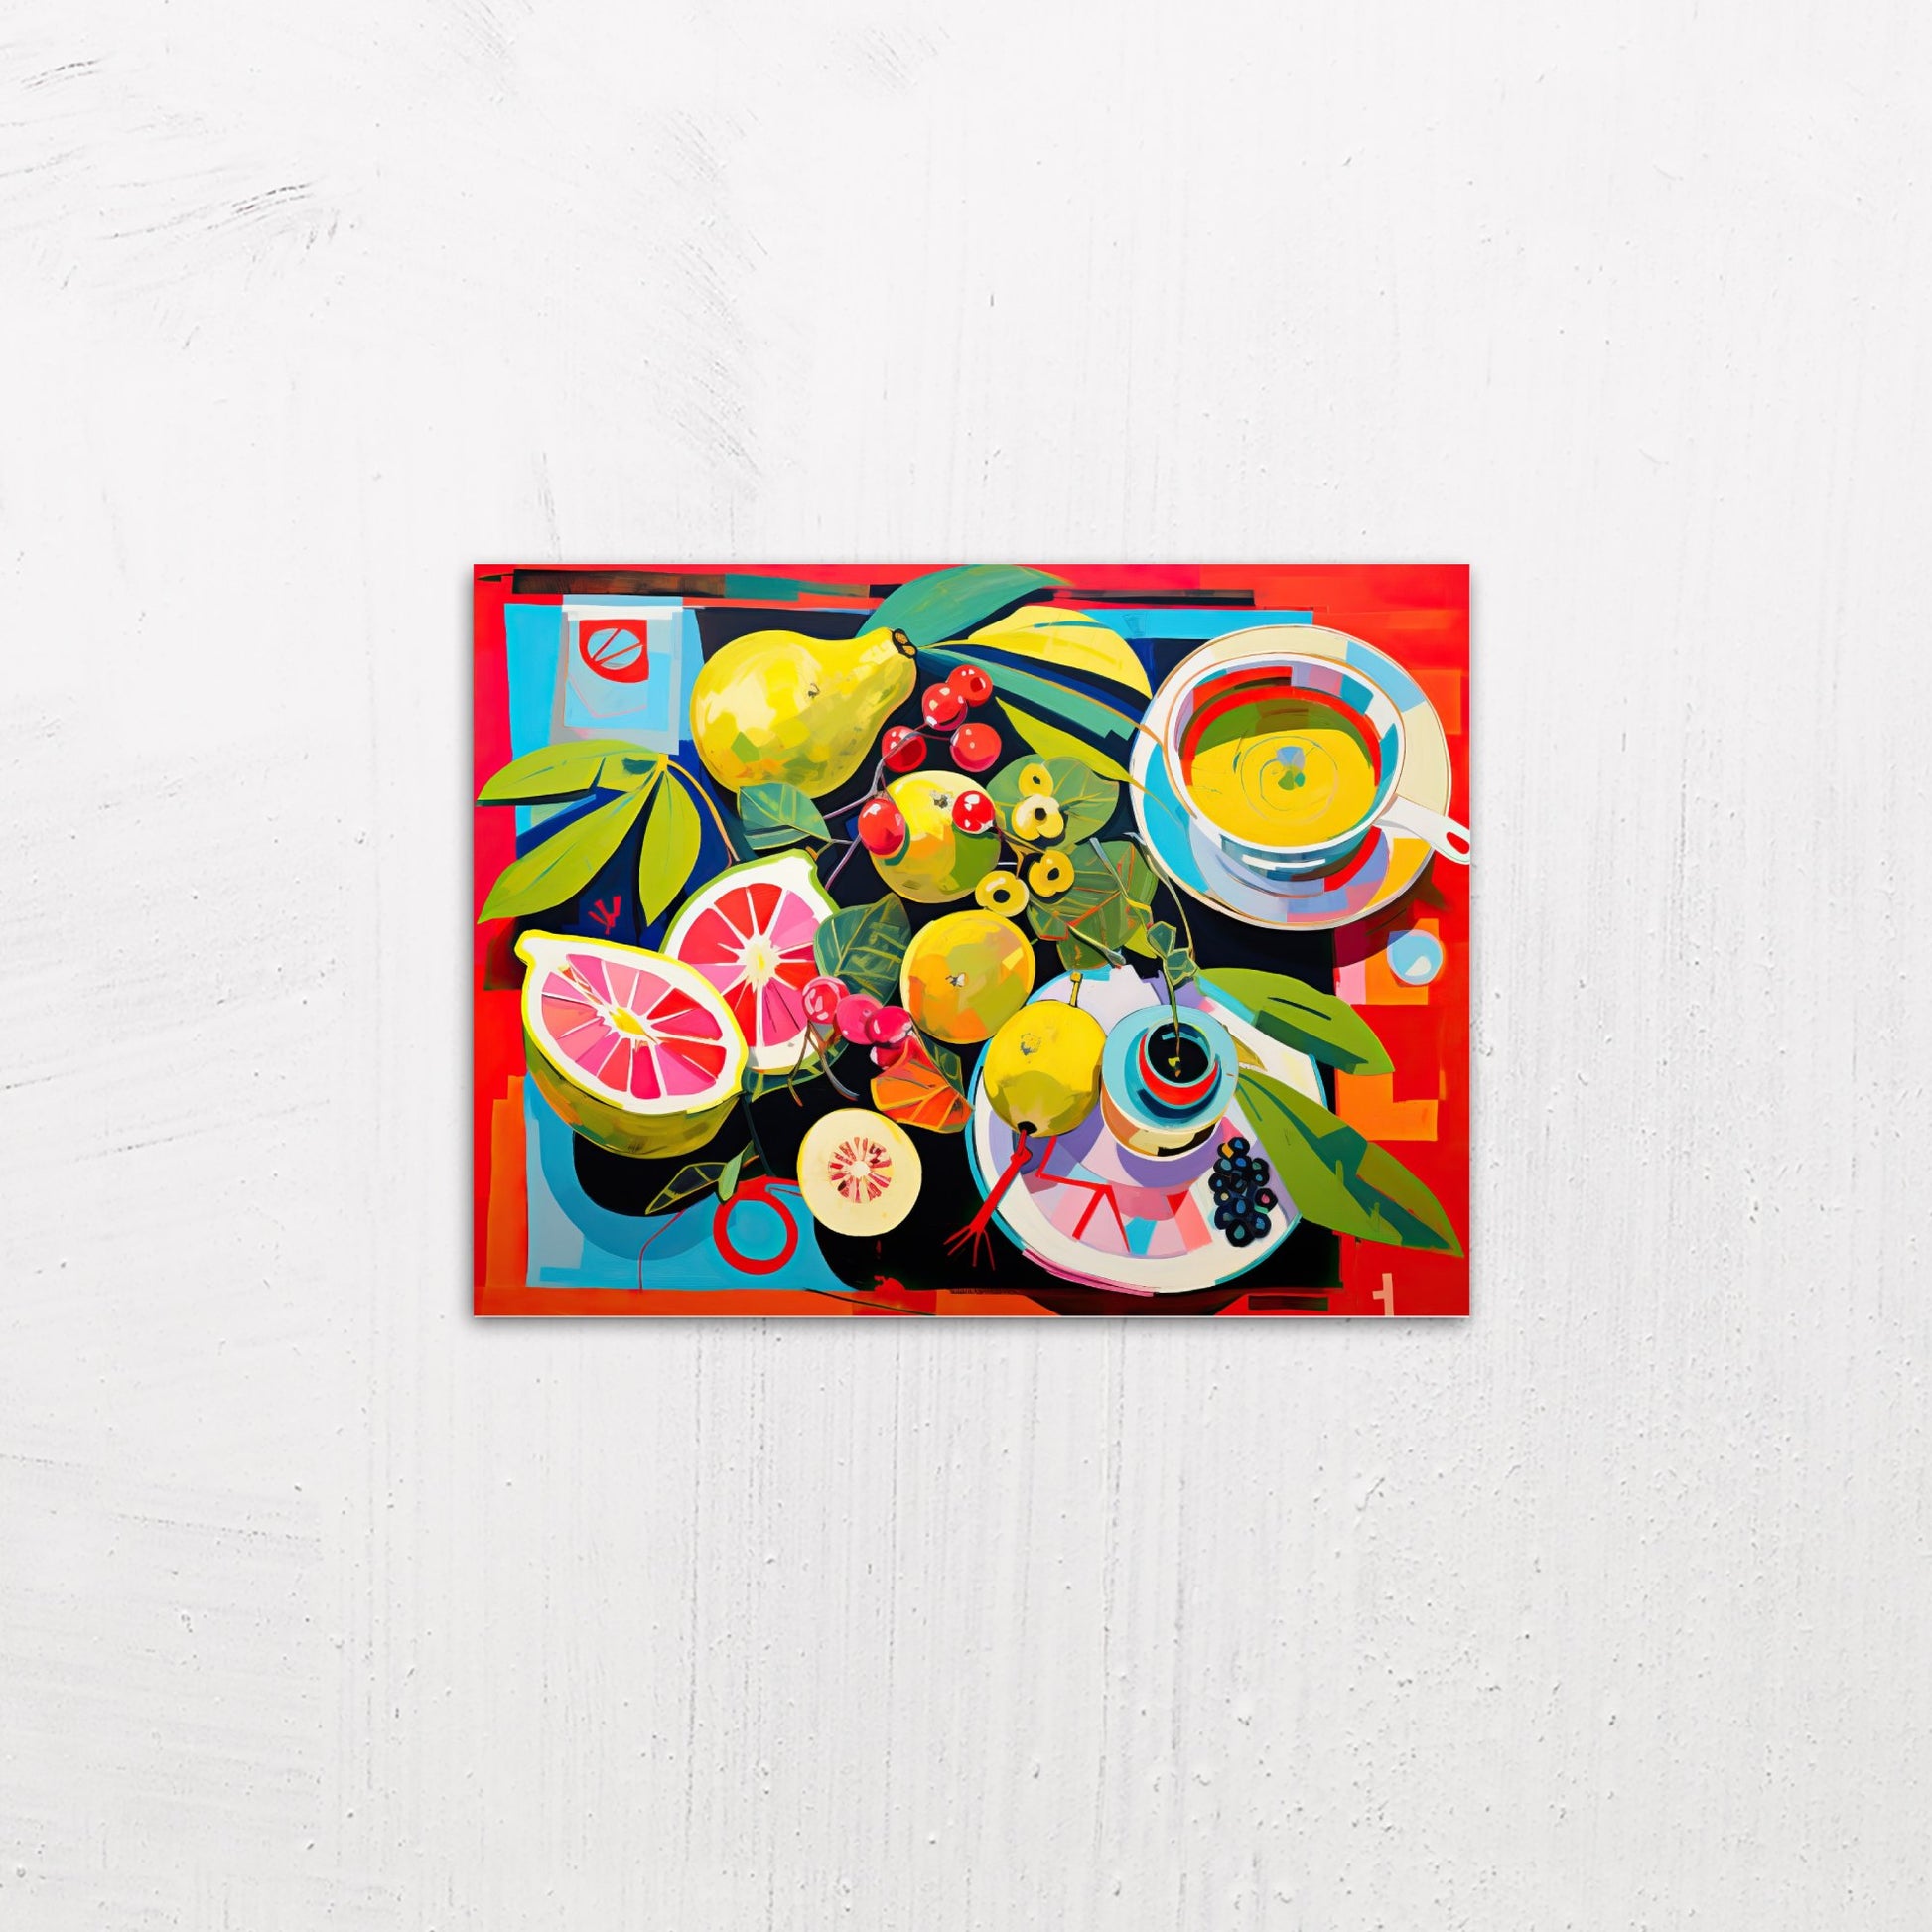 A small size metal art poster display plate with printed design of a Still Life with Fruit Painting